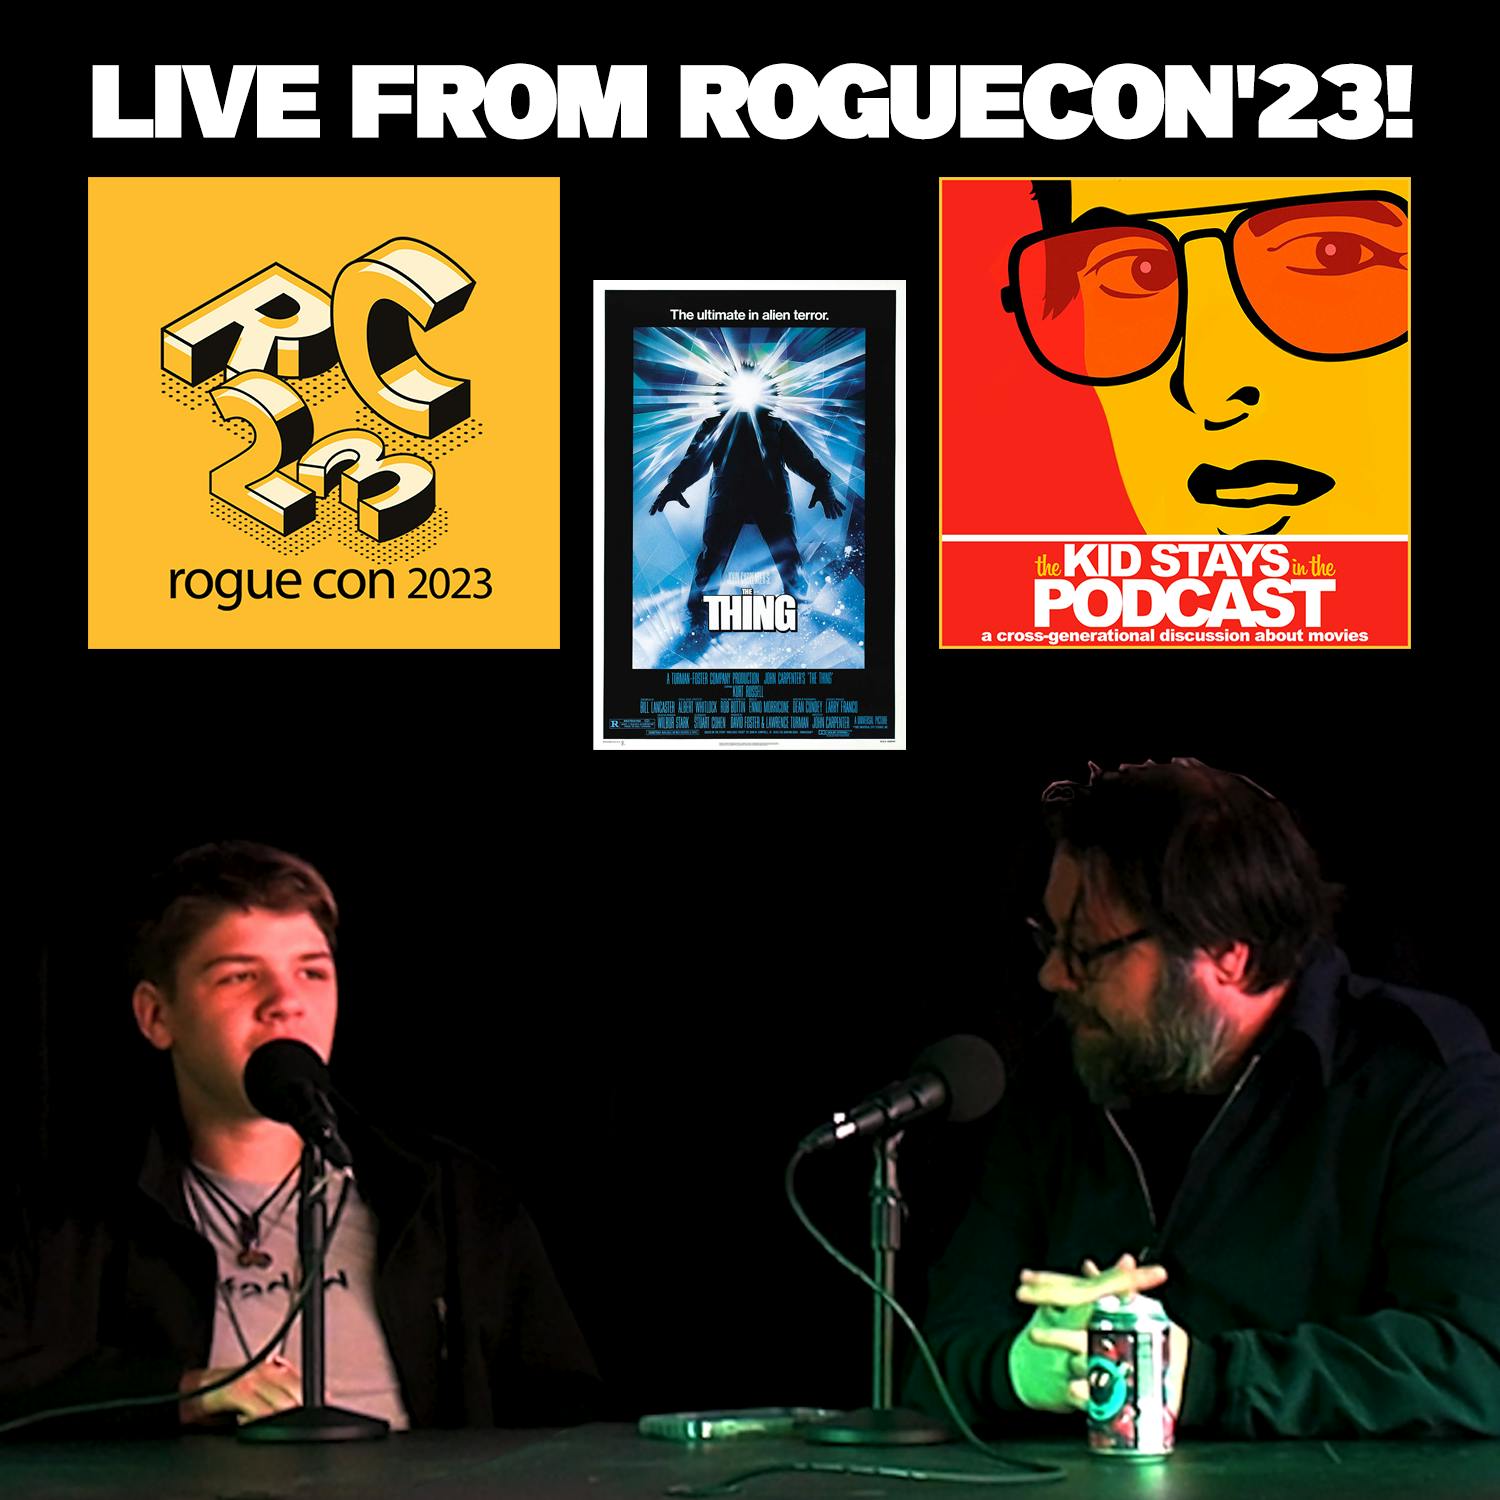 John Carpenter's The Thing (1982) Live from RogueCon'23